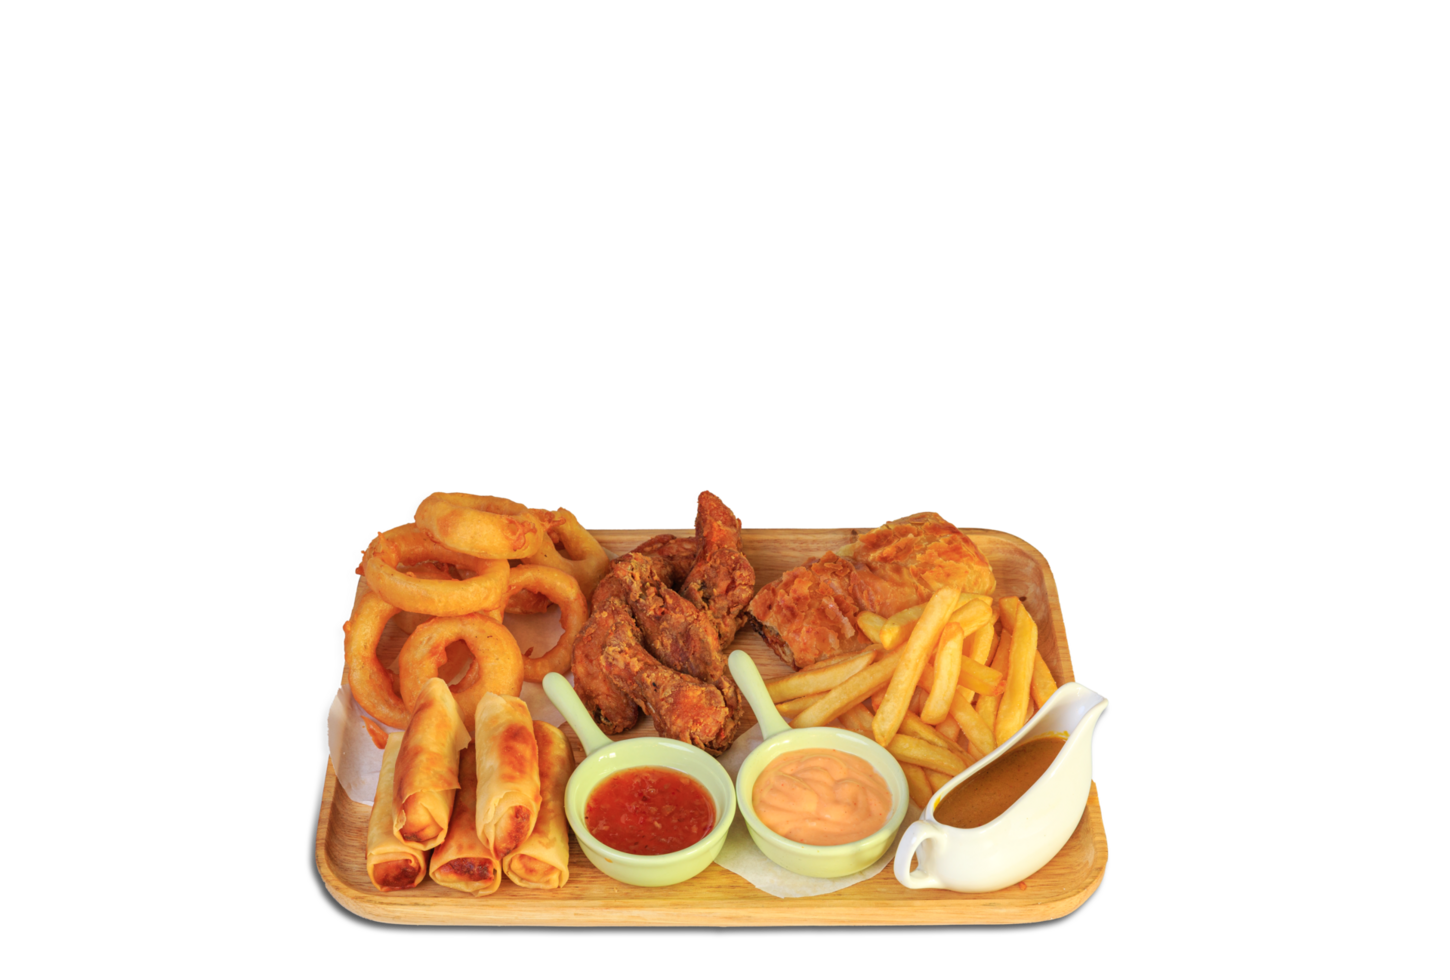 tasty crunchy onion ring, french fries, sausage, fried cheese, pacanga pastry, hot snack plate. Special spice png